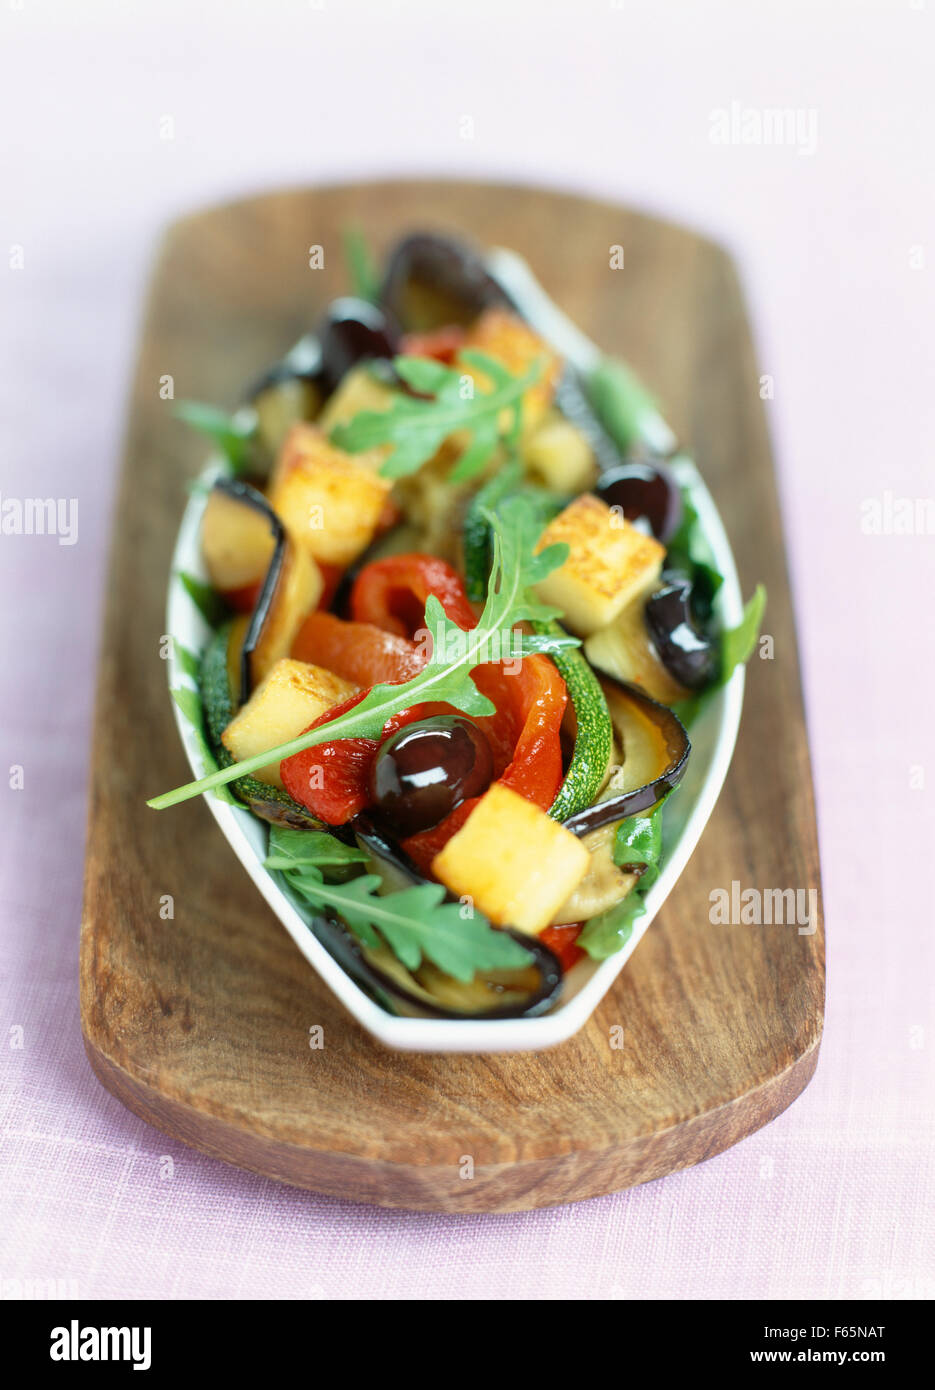 grilled vegetables with crunchy diced polenta Stock Photo